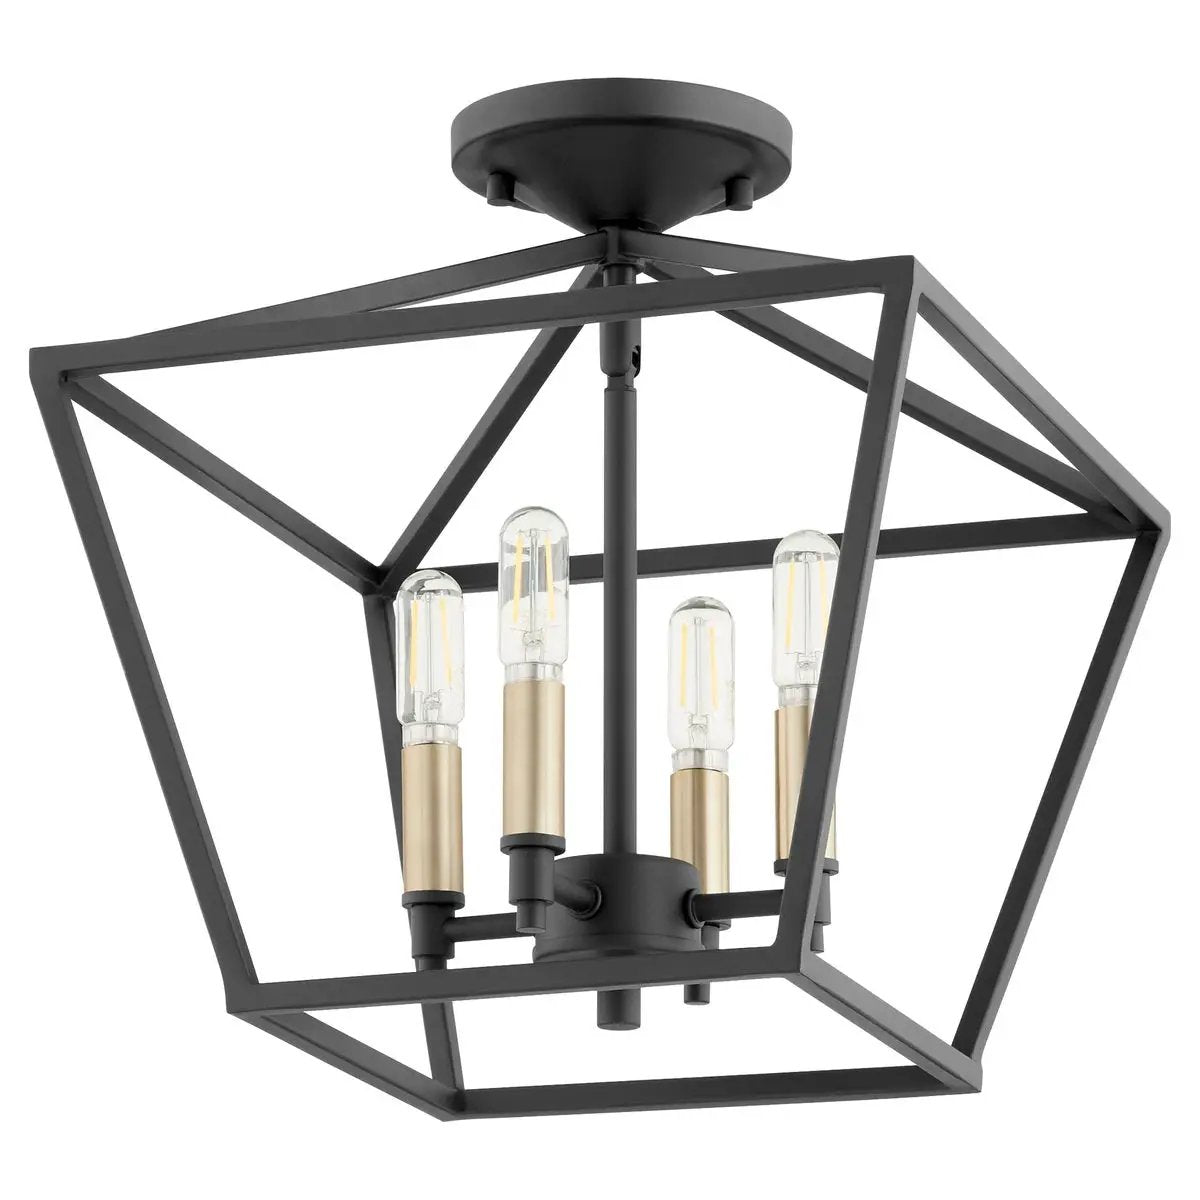 Semi Flush Farmhouse Light with black and gold ceiling design, perfect for modern-farmhouse kitchens or traditional living rooms. Candelabra bulbs provide ample illumination. Dimensions: 13"W x 13.75"H. Fits well with distressed natural woods and whitewashed floors.